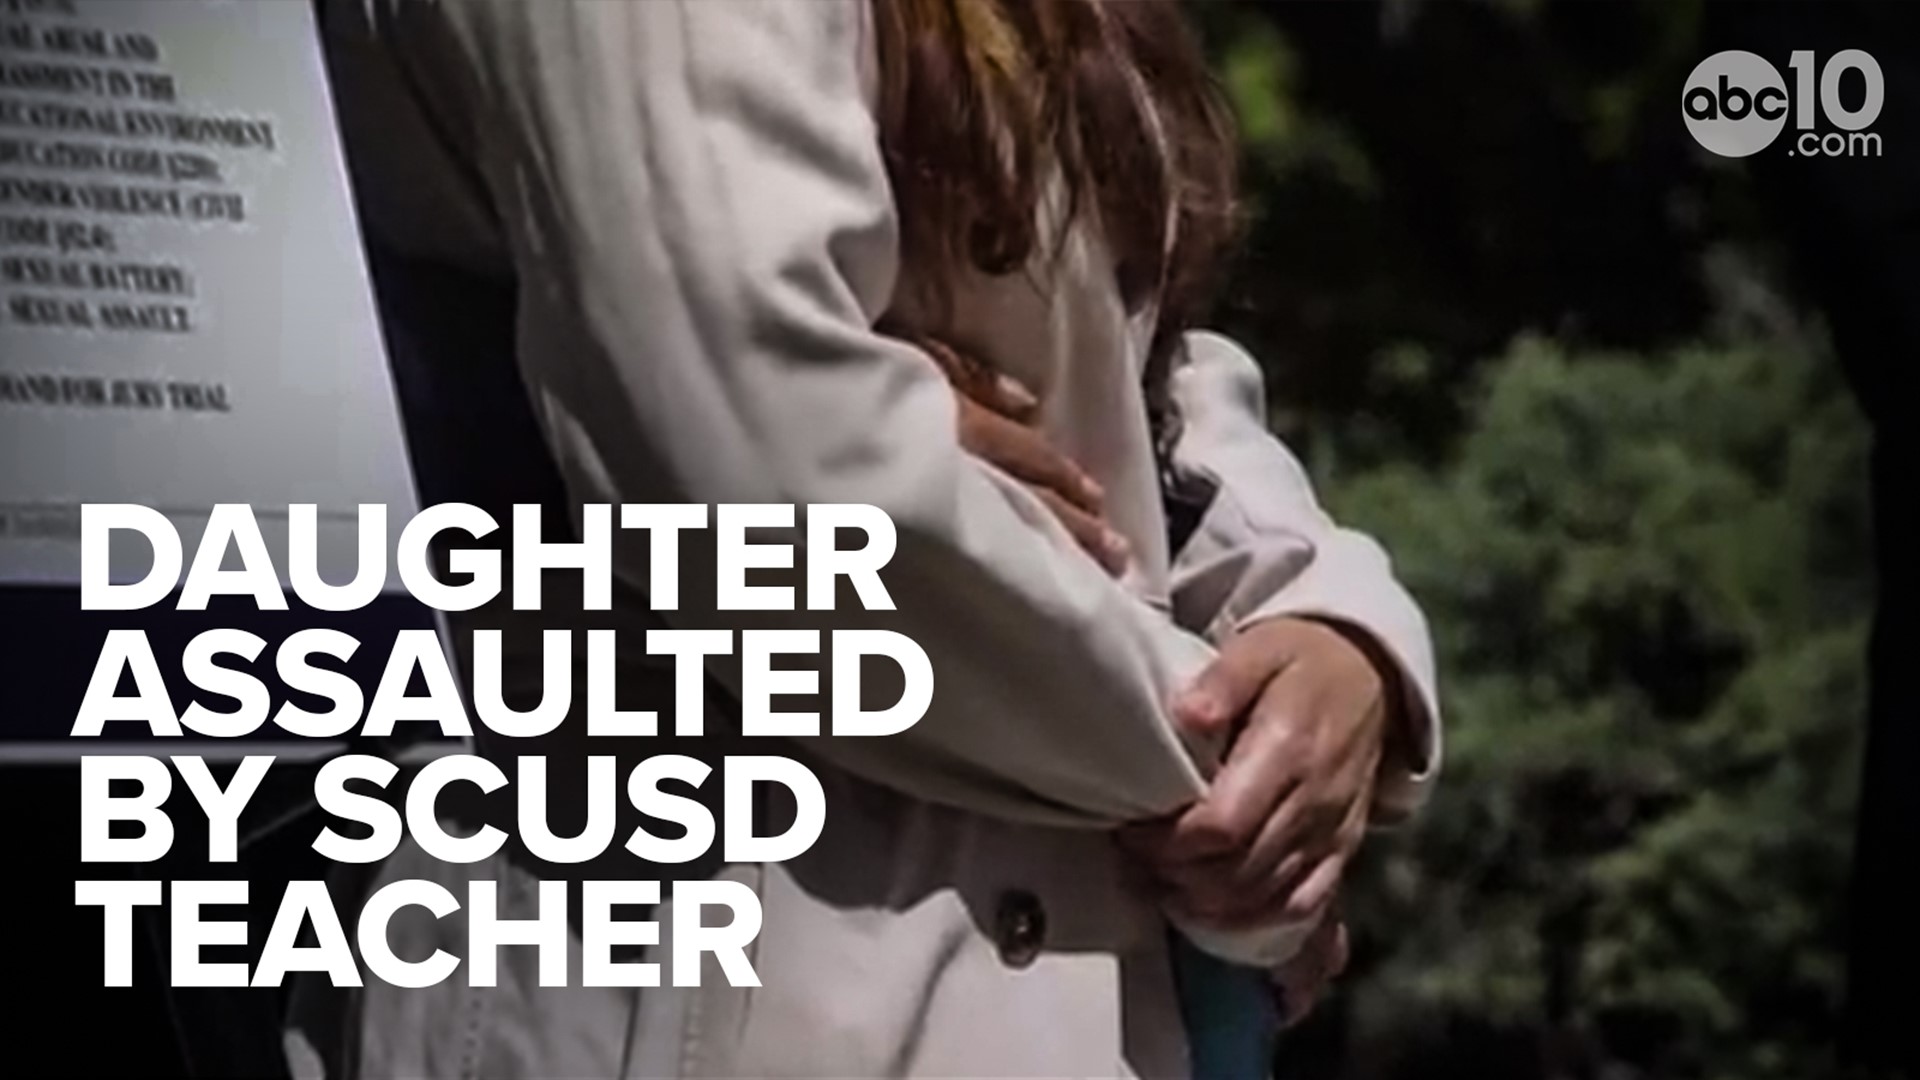 While the man who sexually assaulted a 3rd grader has been arrested, the family feels the Sacramento City Unified School District should also suffer consequences.